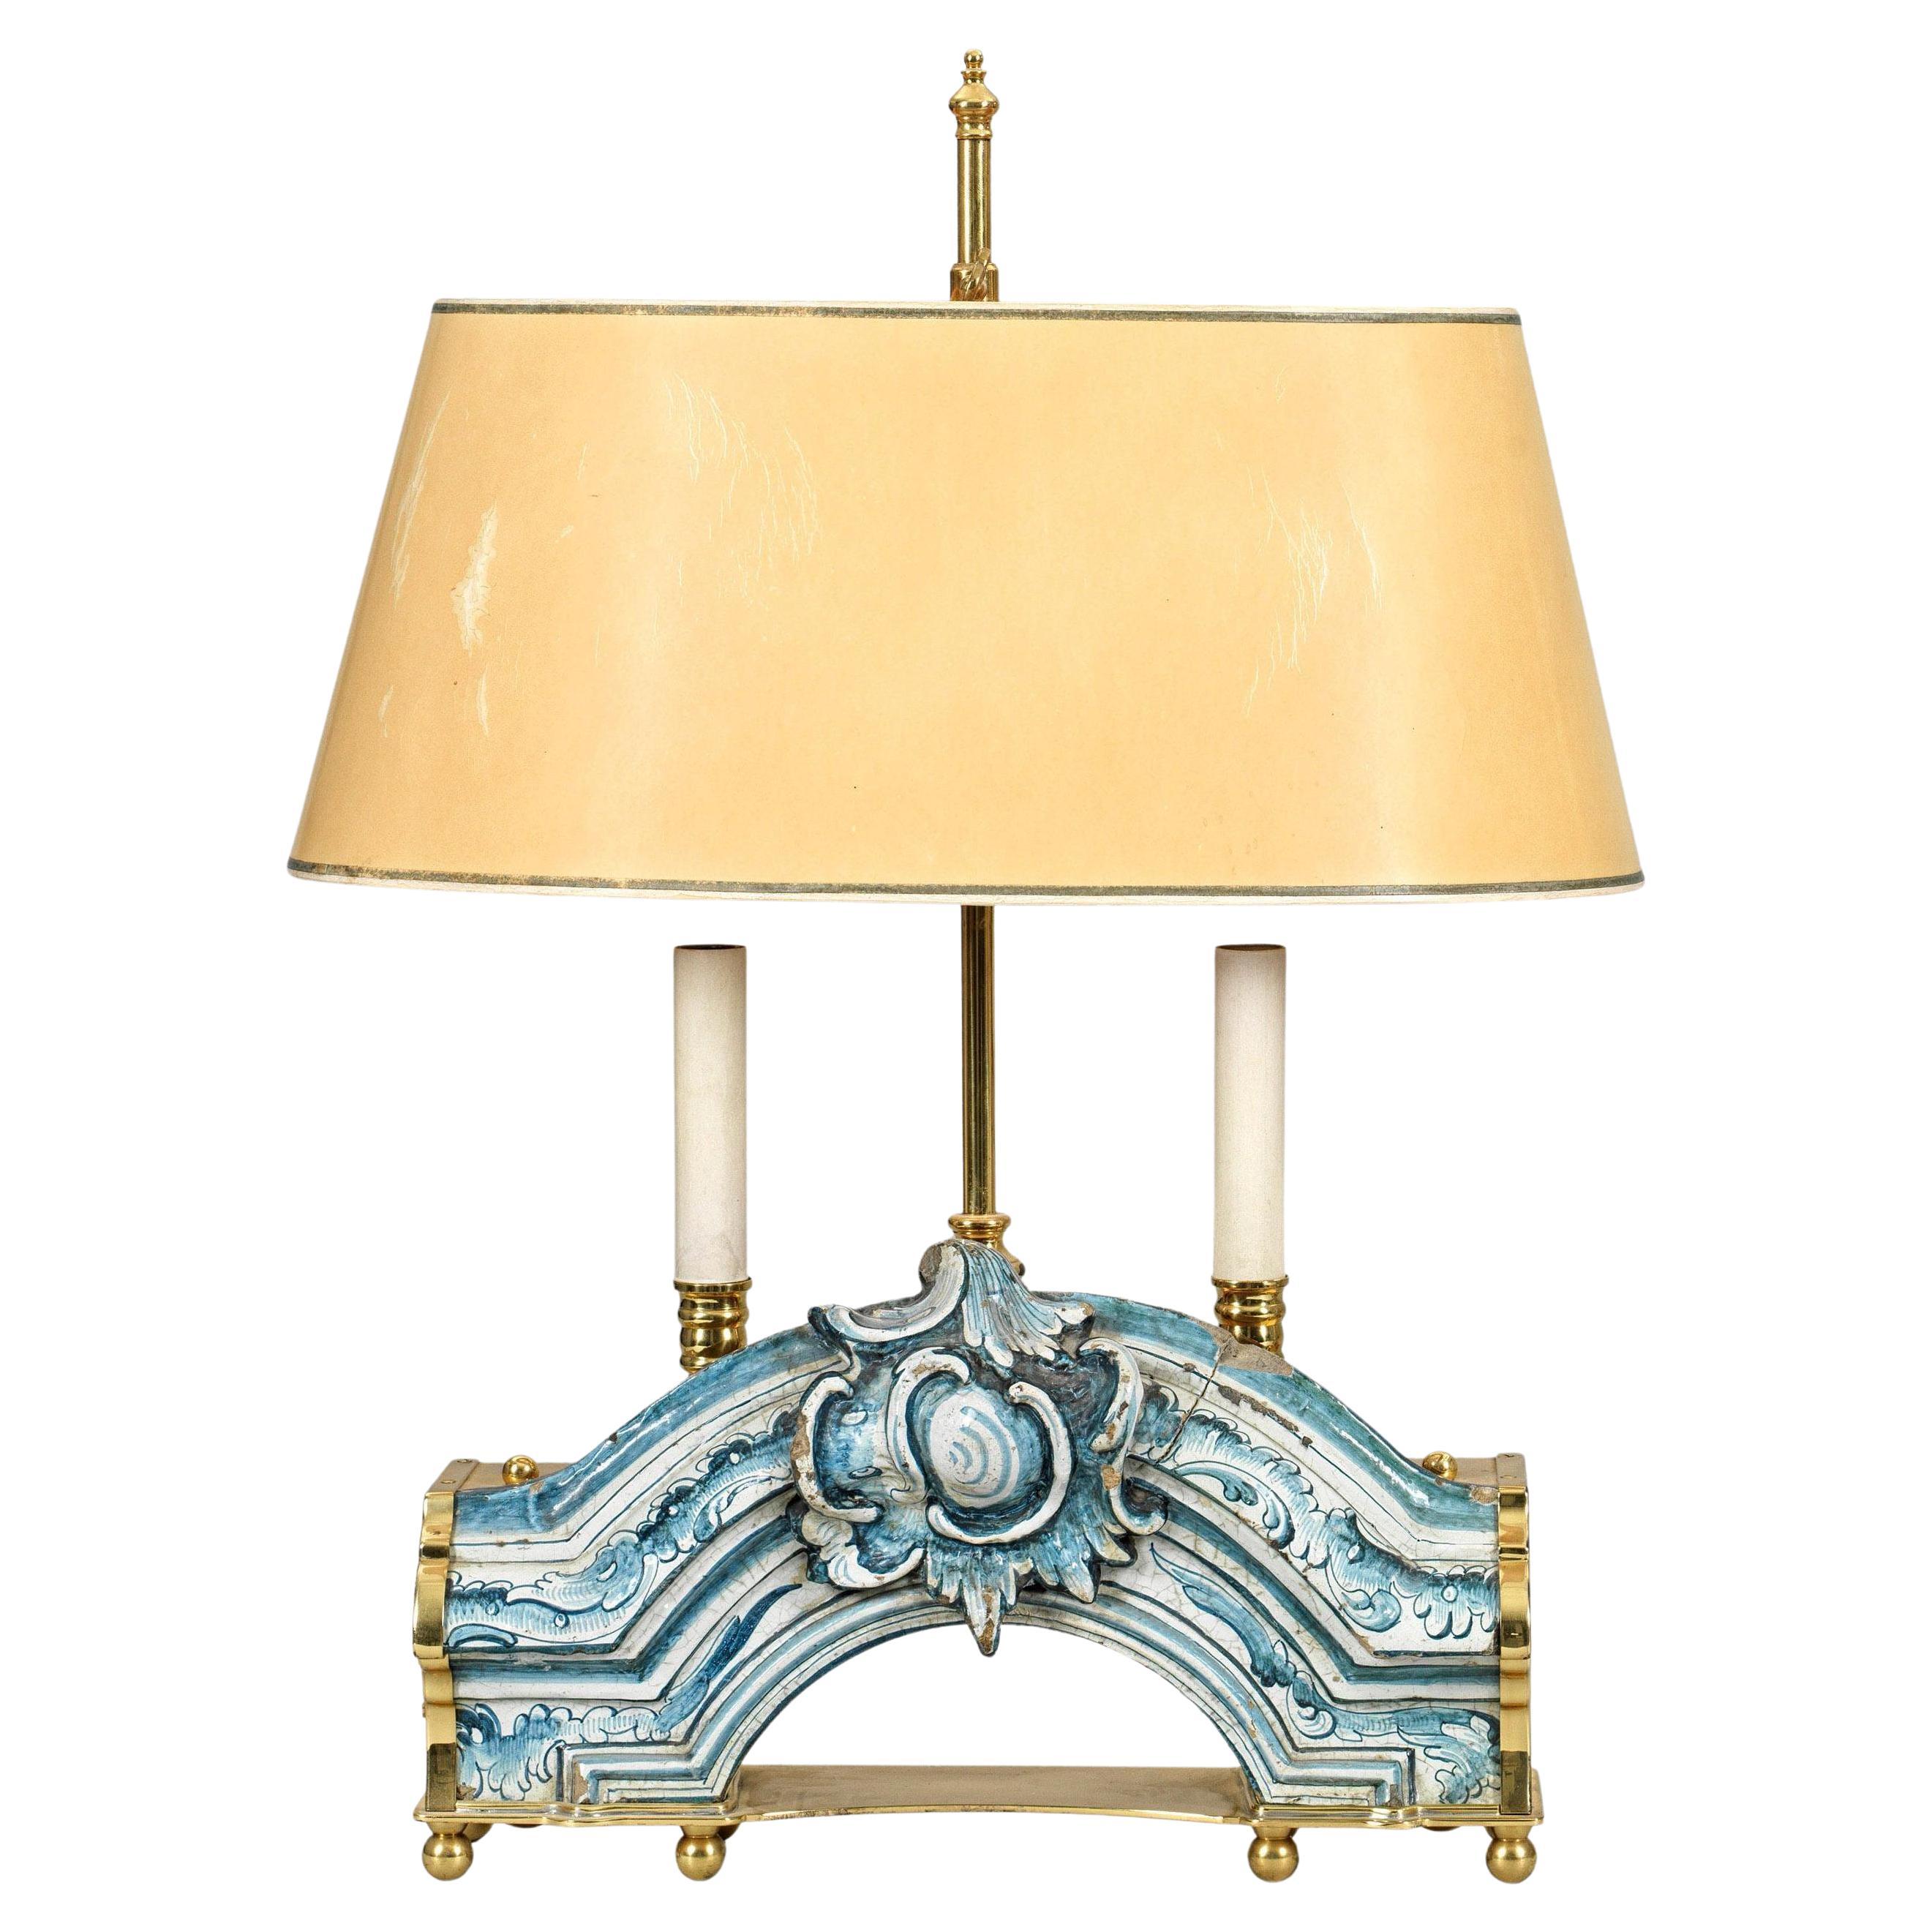 Unique Table Lamp with Antique Faience Blue and Cream Architectural Fragment